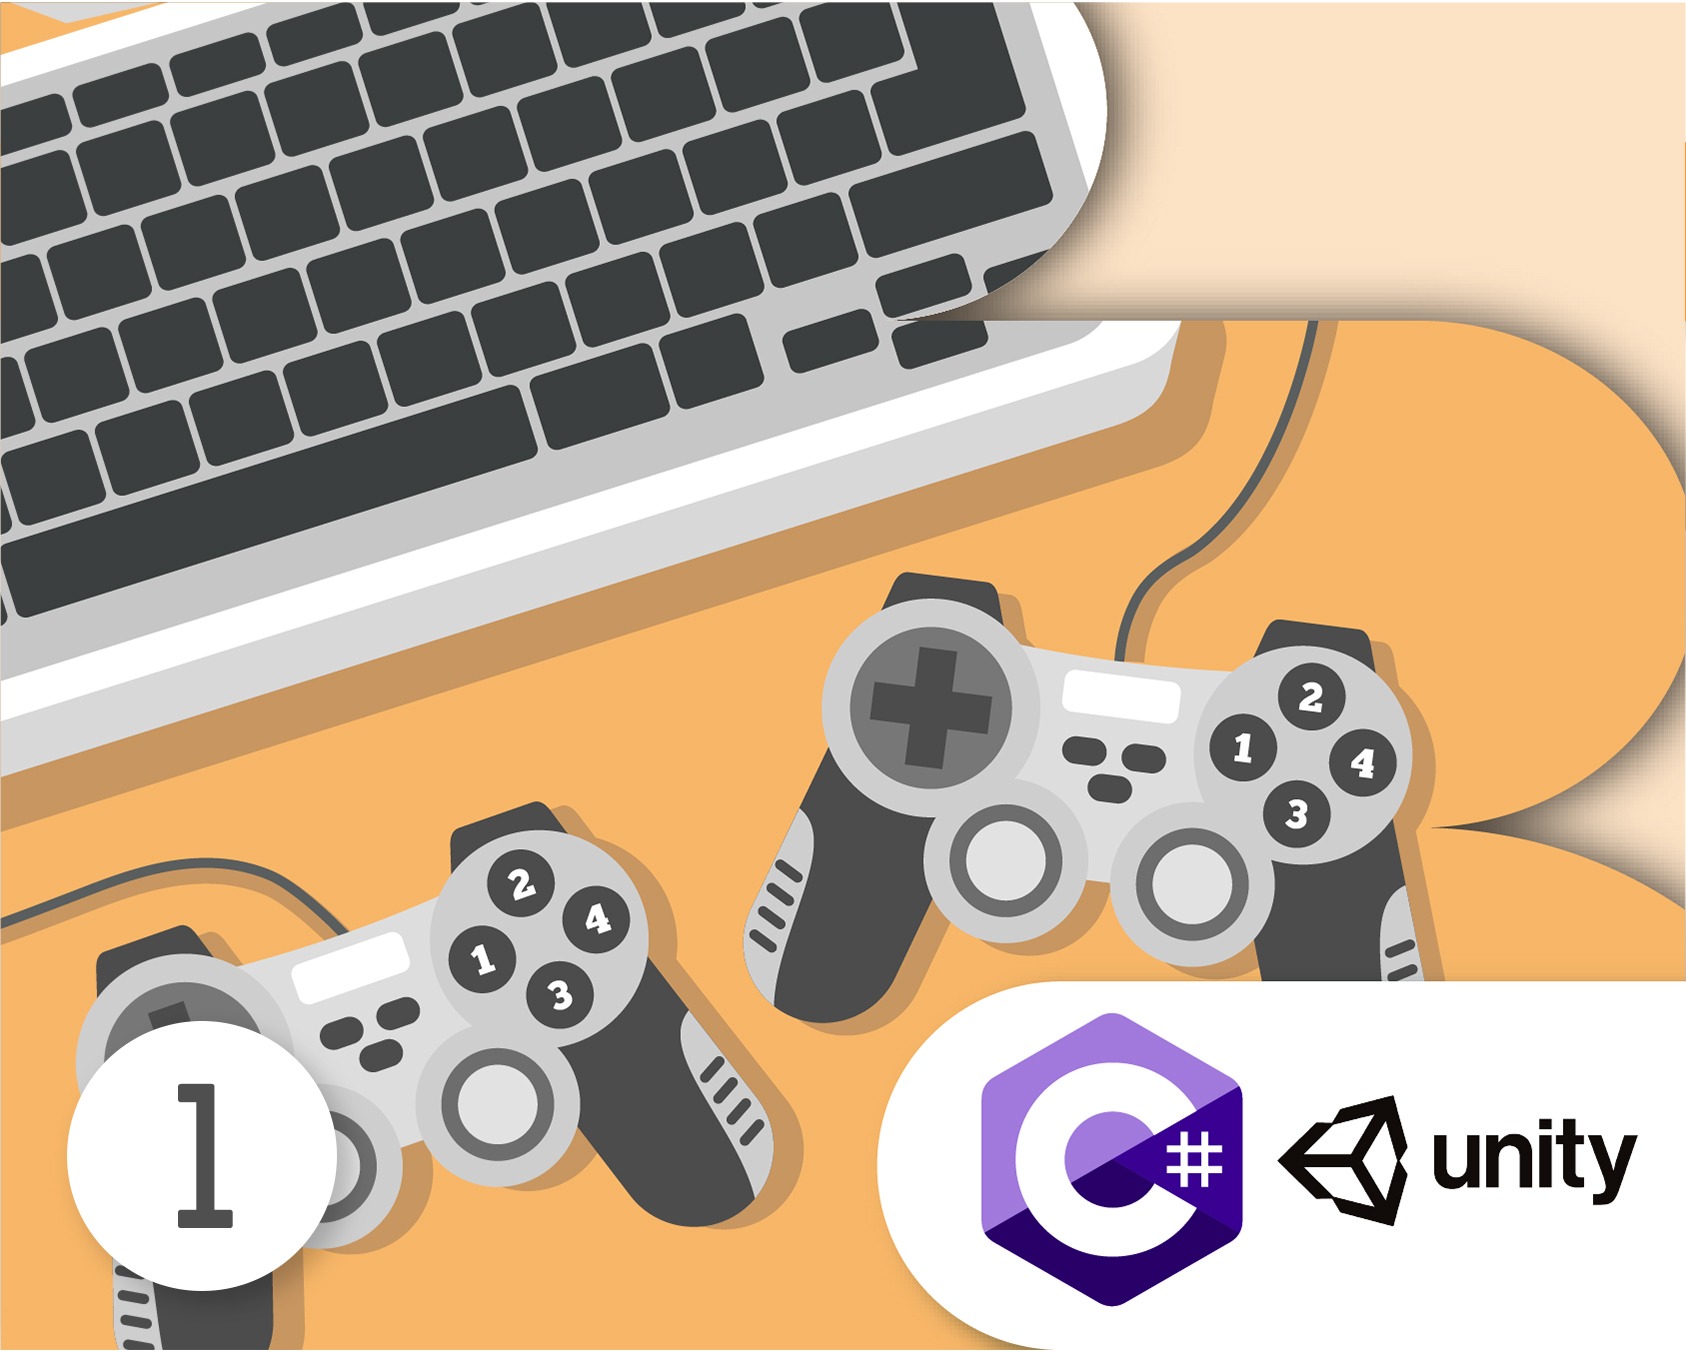 Creating computer games in Unity semester 1 ONLINE